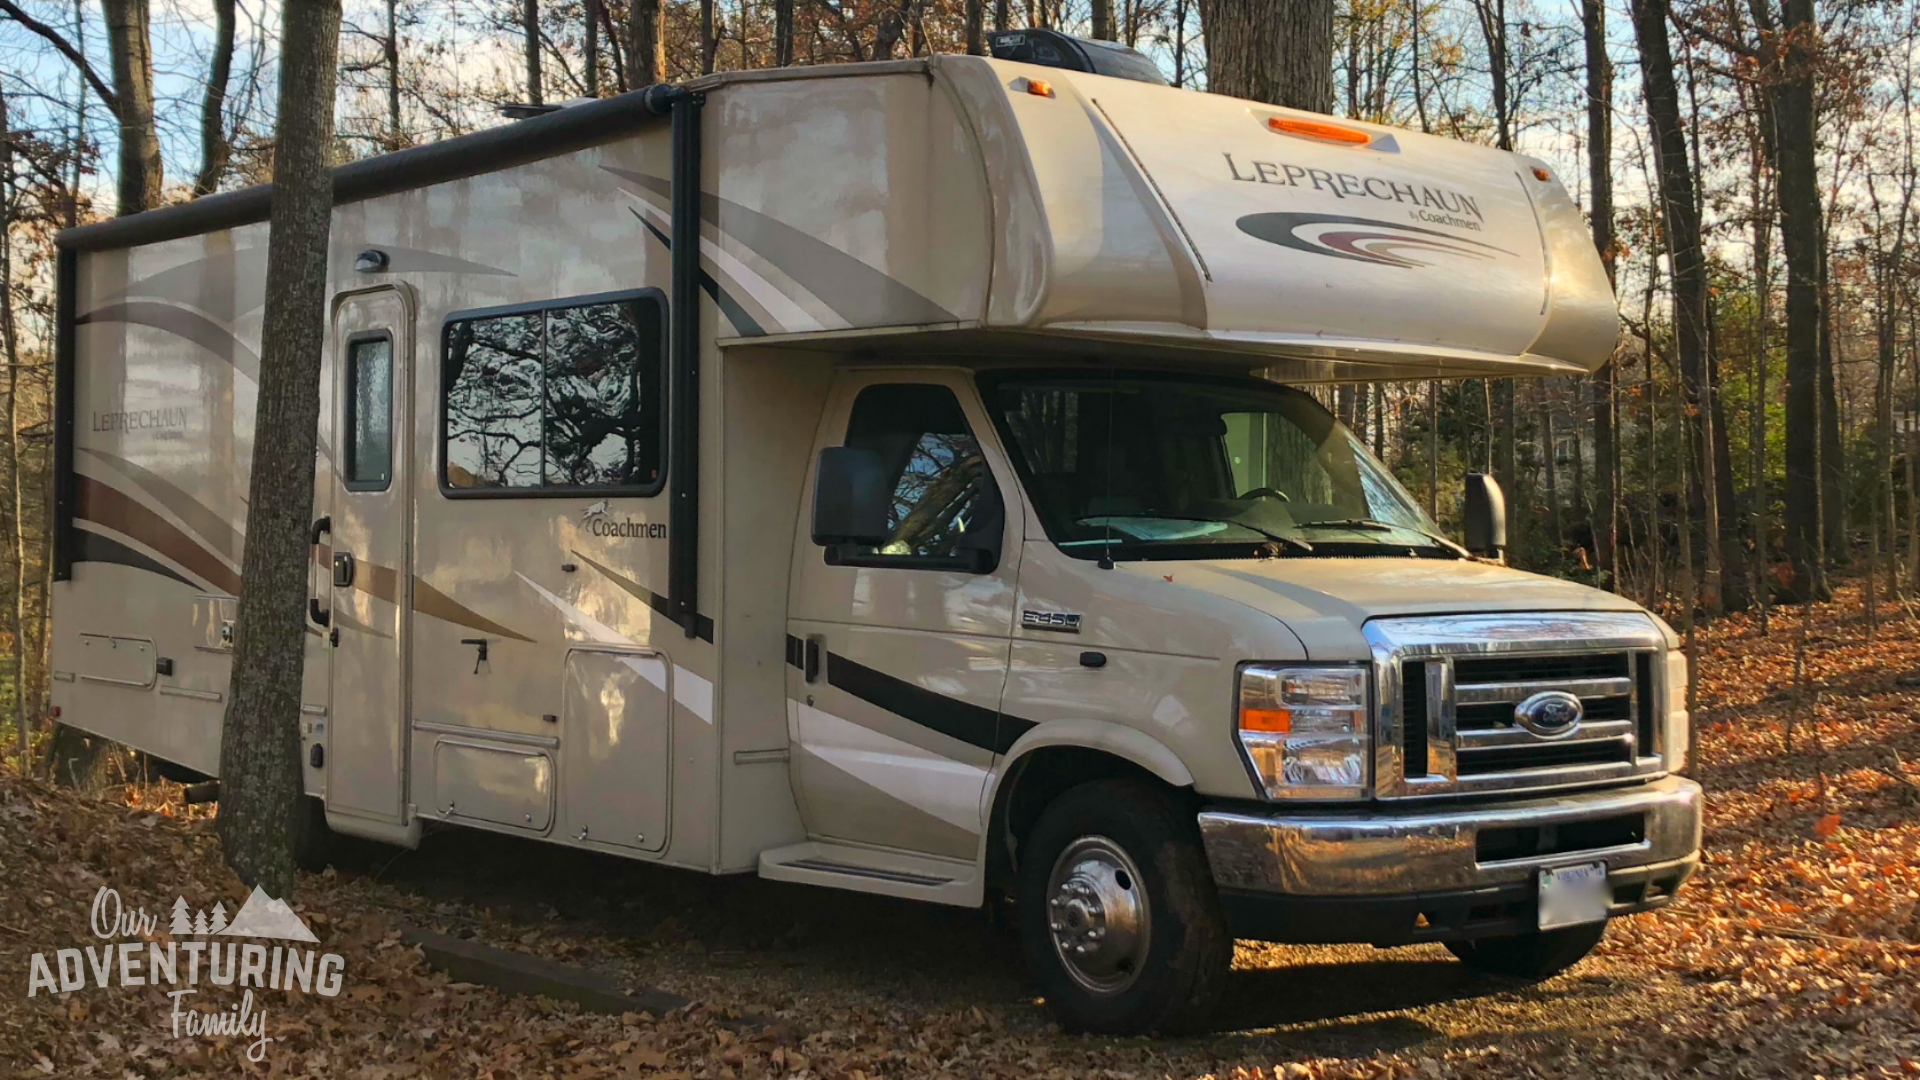 We rented our RV through RVShare and Outdoorsy this year and learned a lot. Here's 16 tips to a successful RV renting experience if you want to give it a try. Find them at ouradventuringfamily.com.